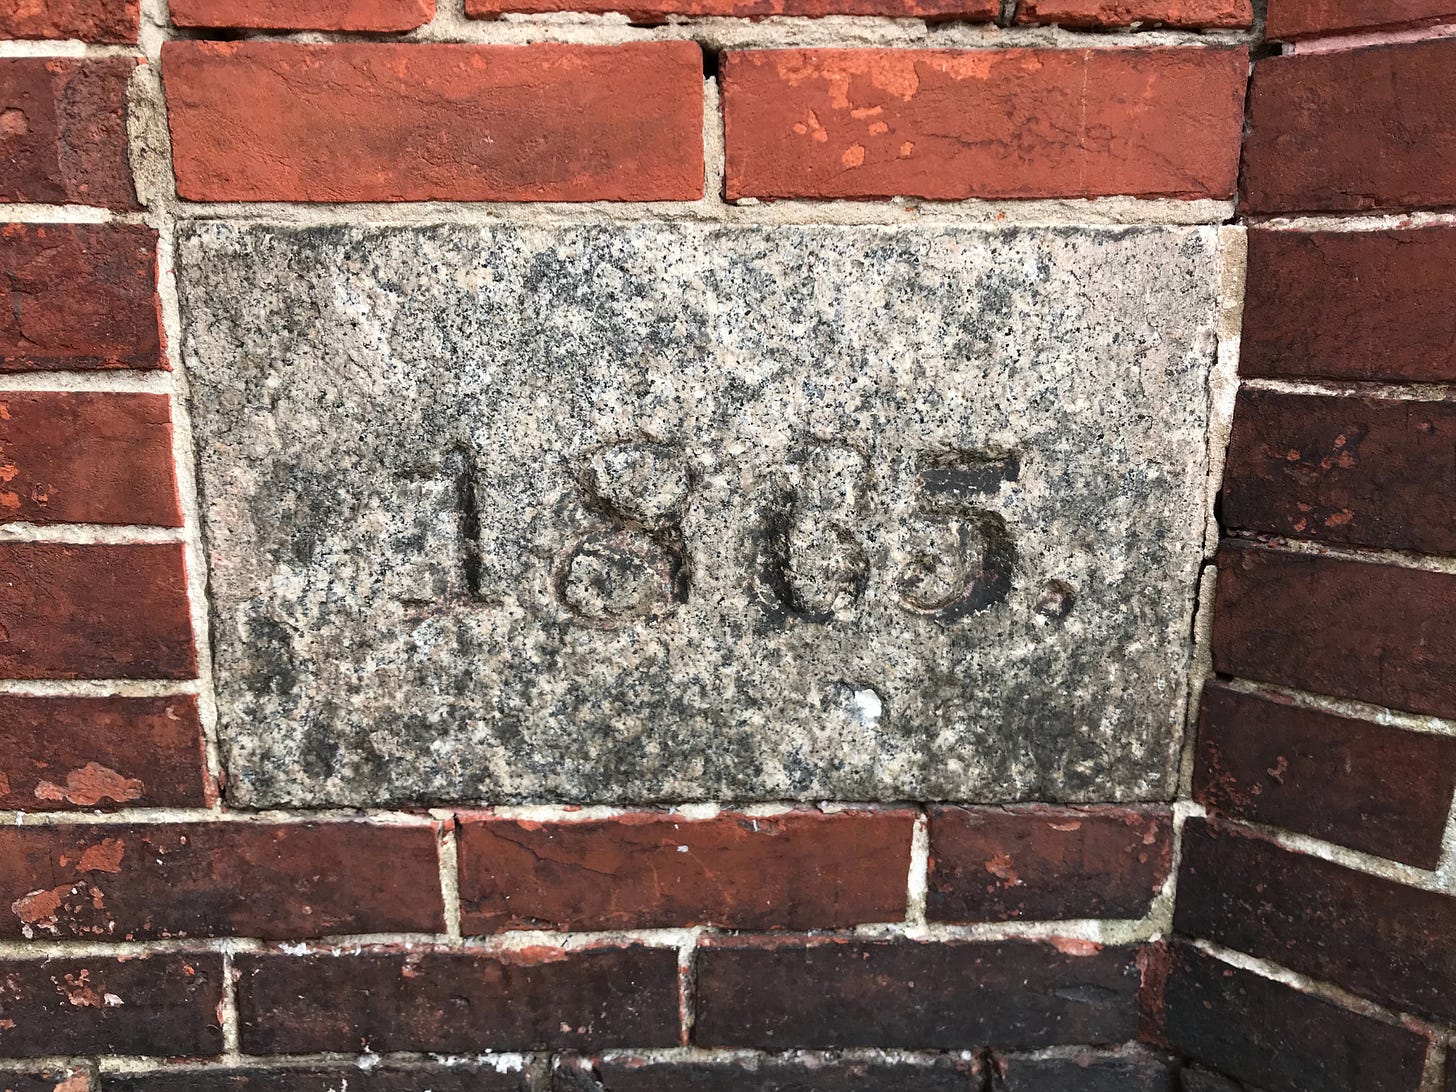 A cornerstone that includes the engraved date 